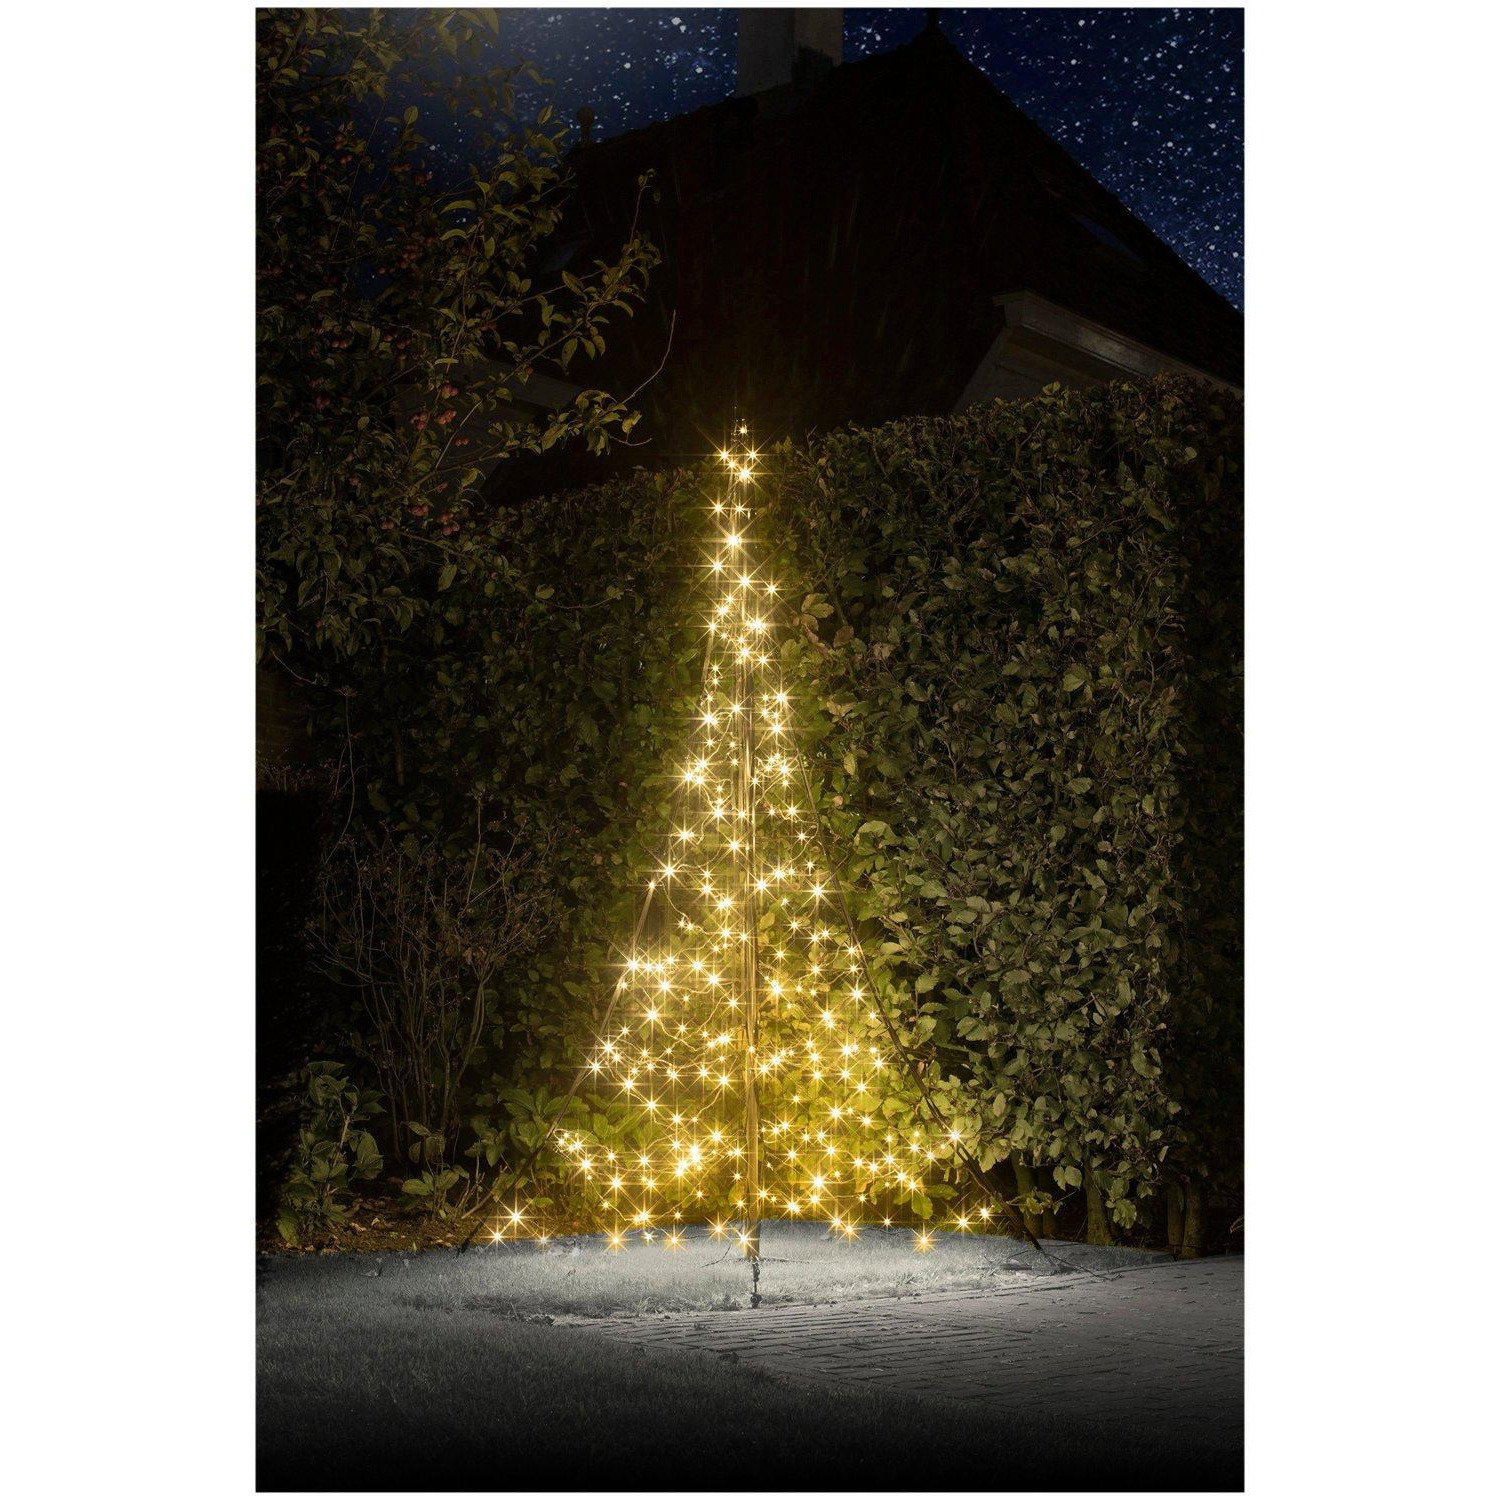 All Surface Outdoor Christmas Tree with Twinkling Lights - 2M 240 LED lights create a beautifully illuminated Christmas tree - image 1